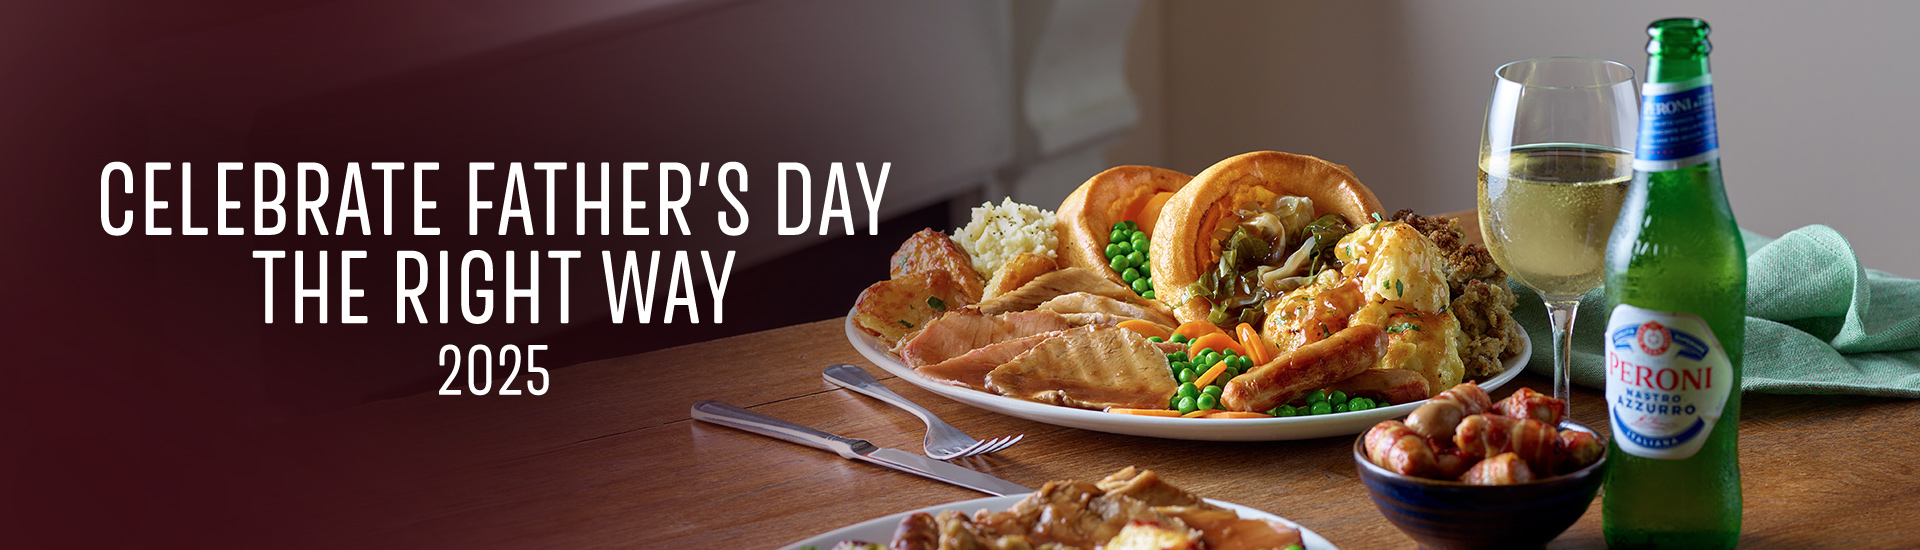 Father’s day carvery in St. Helens